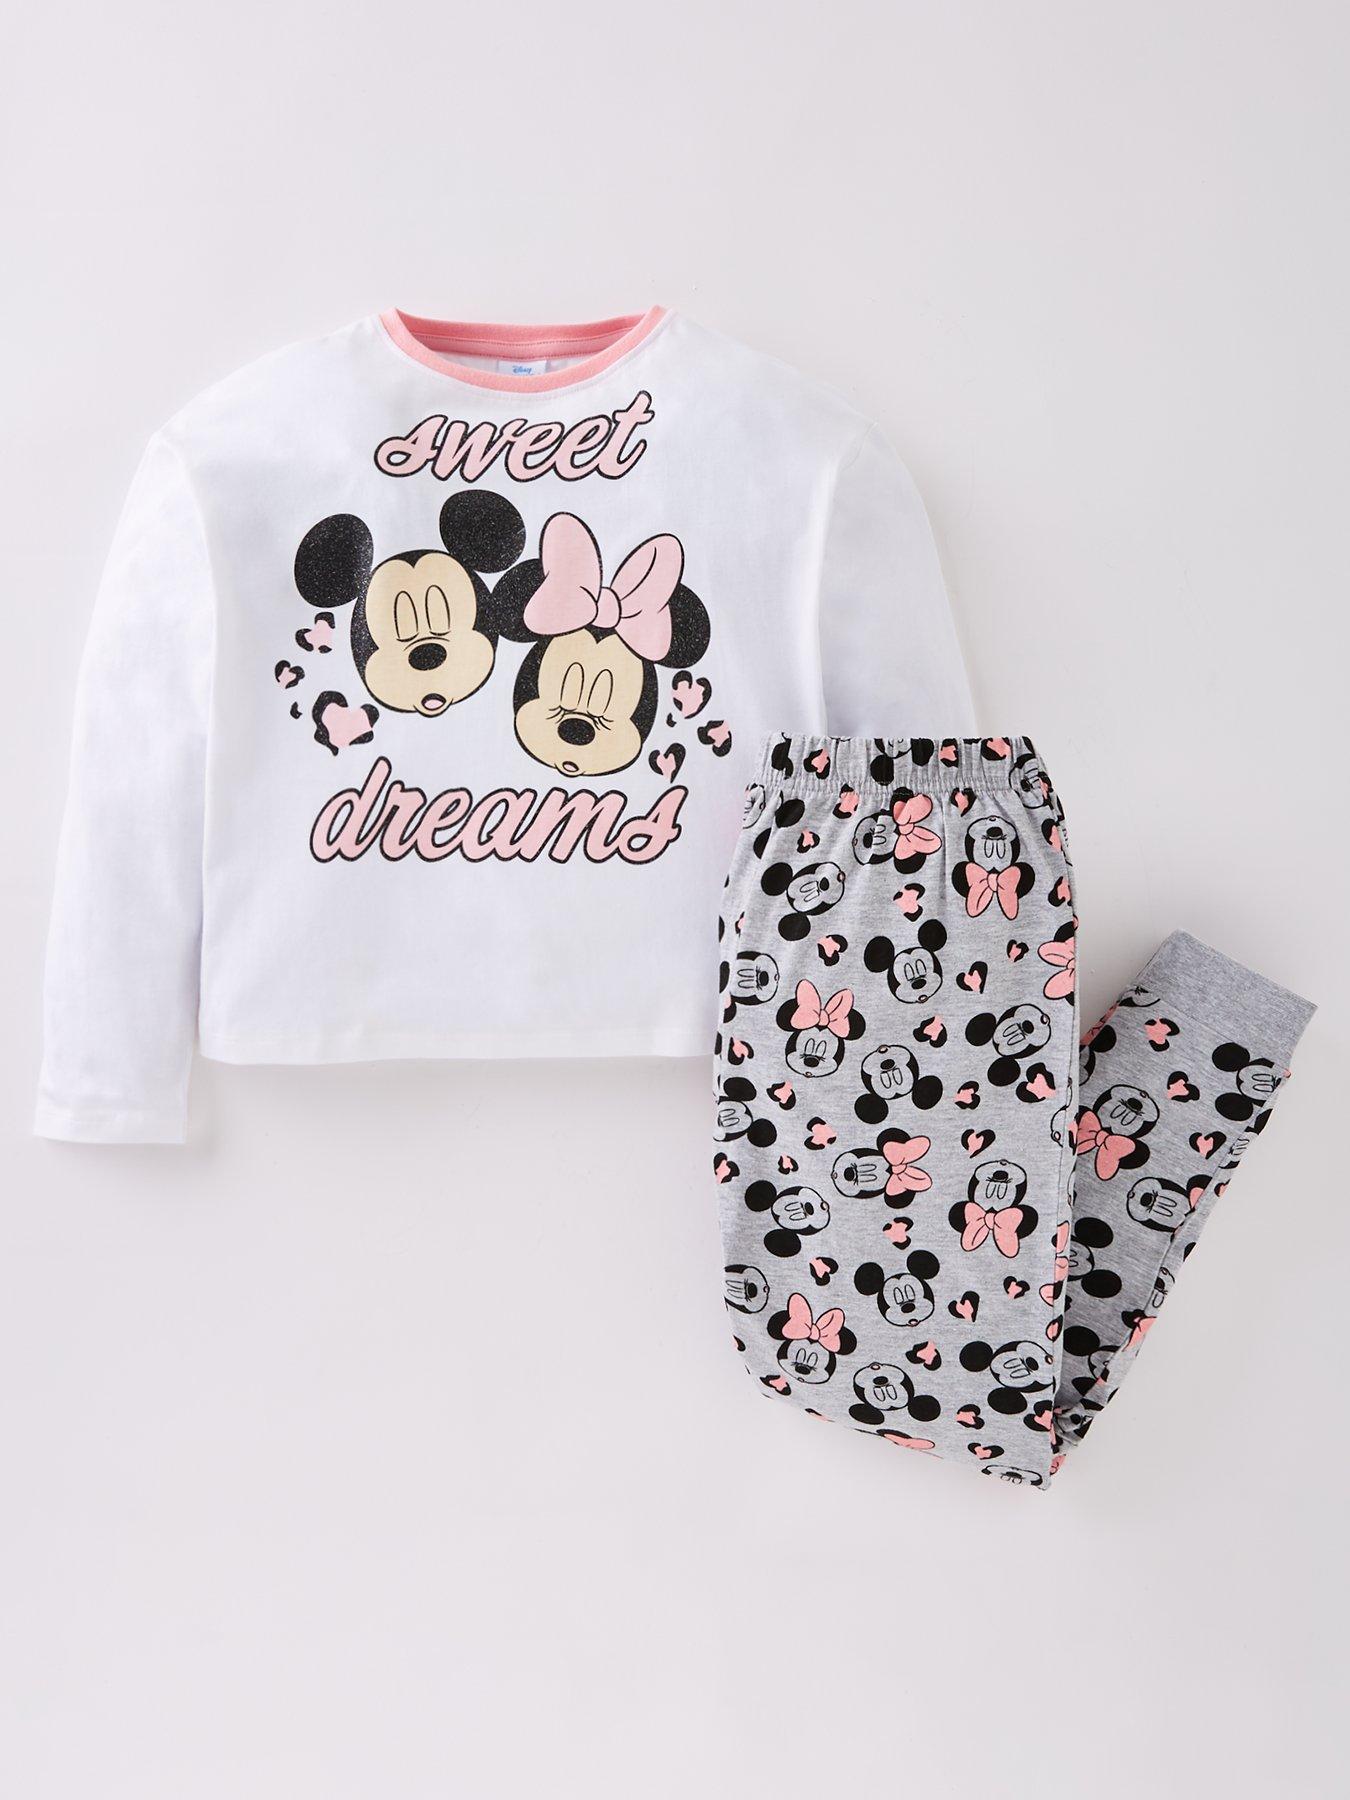 Details about   Girls Long Sleeve Disney Character T Shirt Top Various Kids Gift Size 